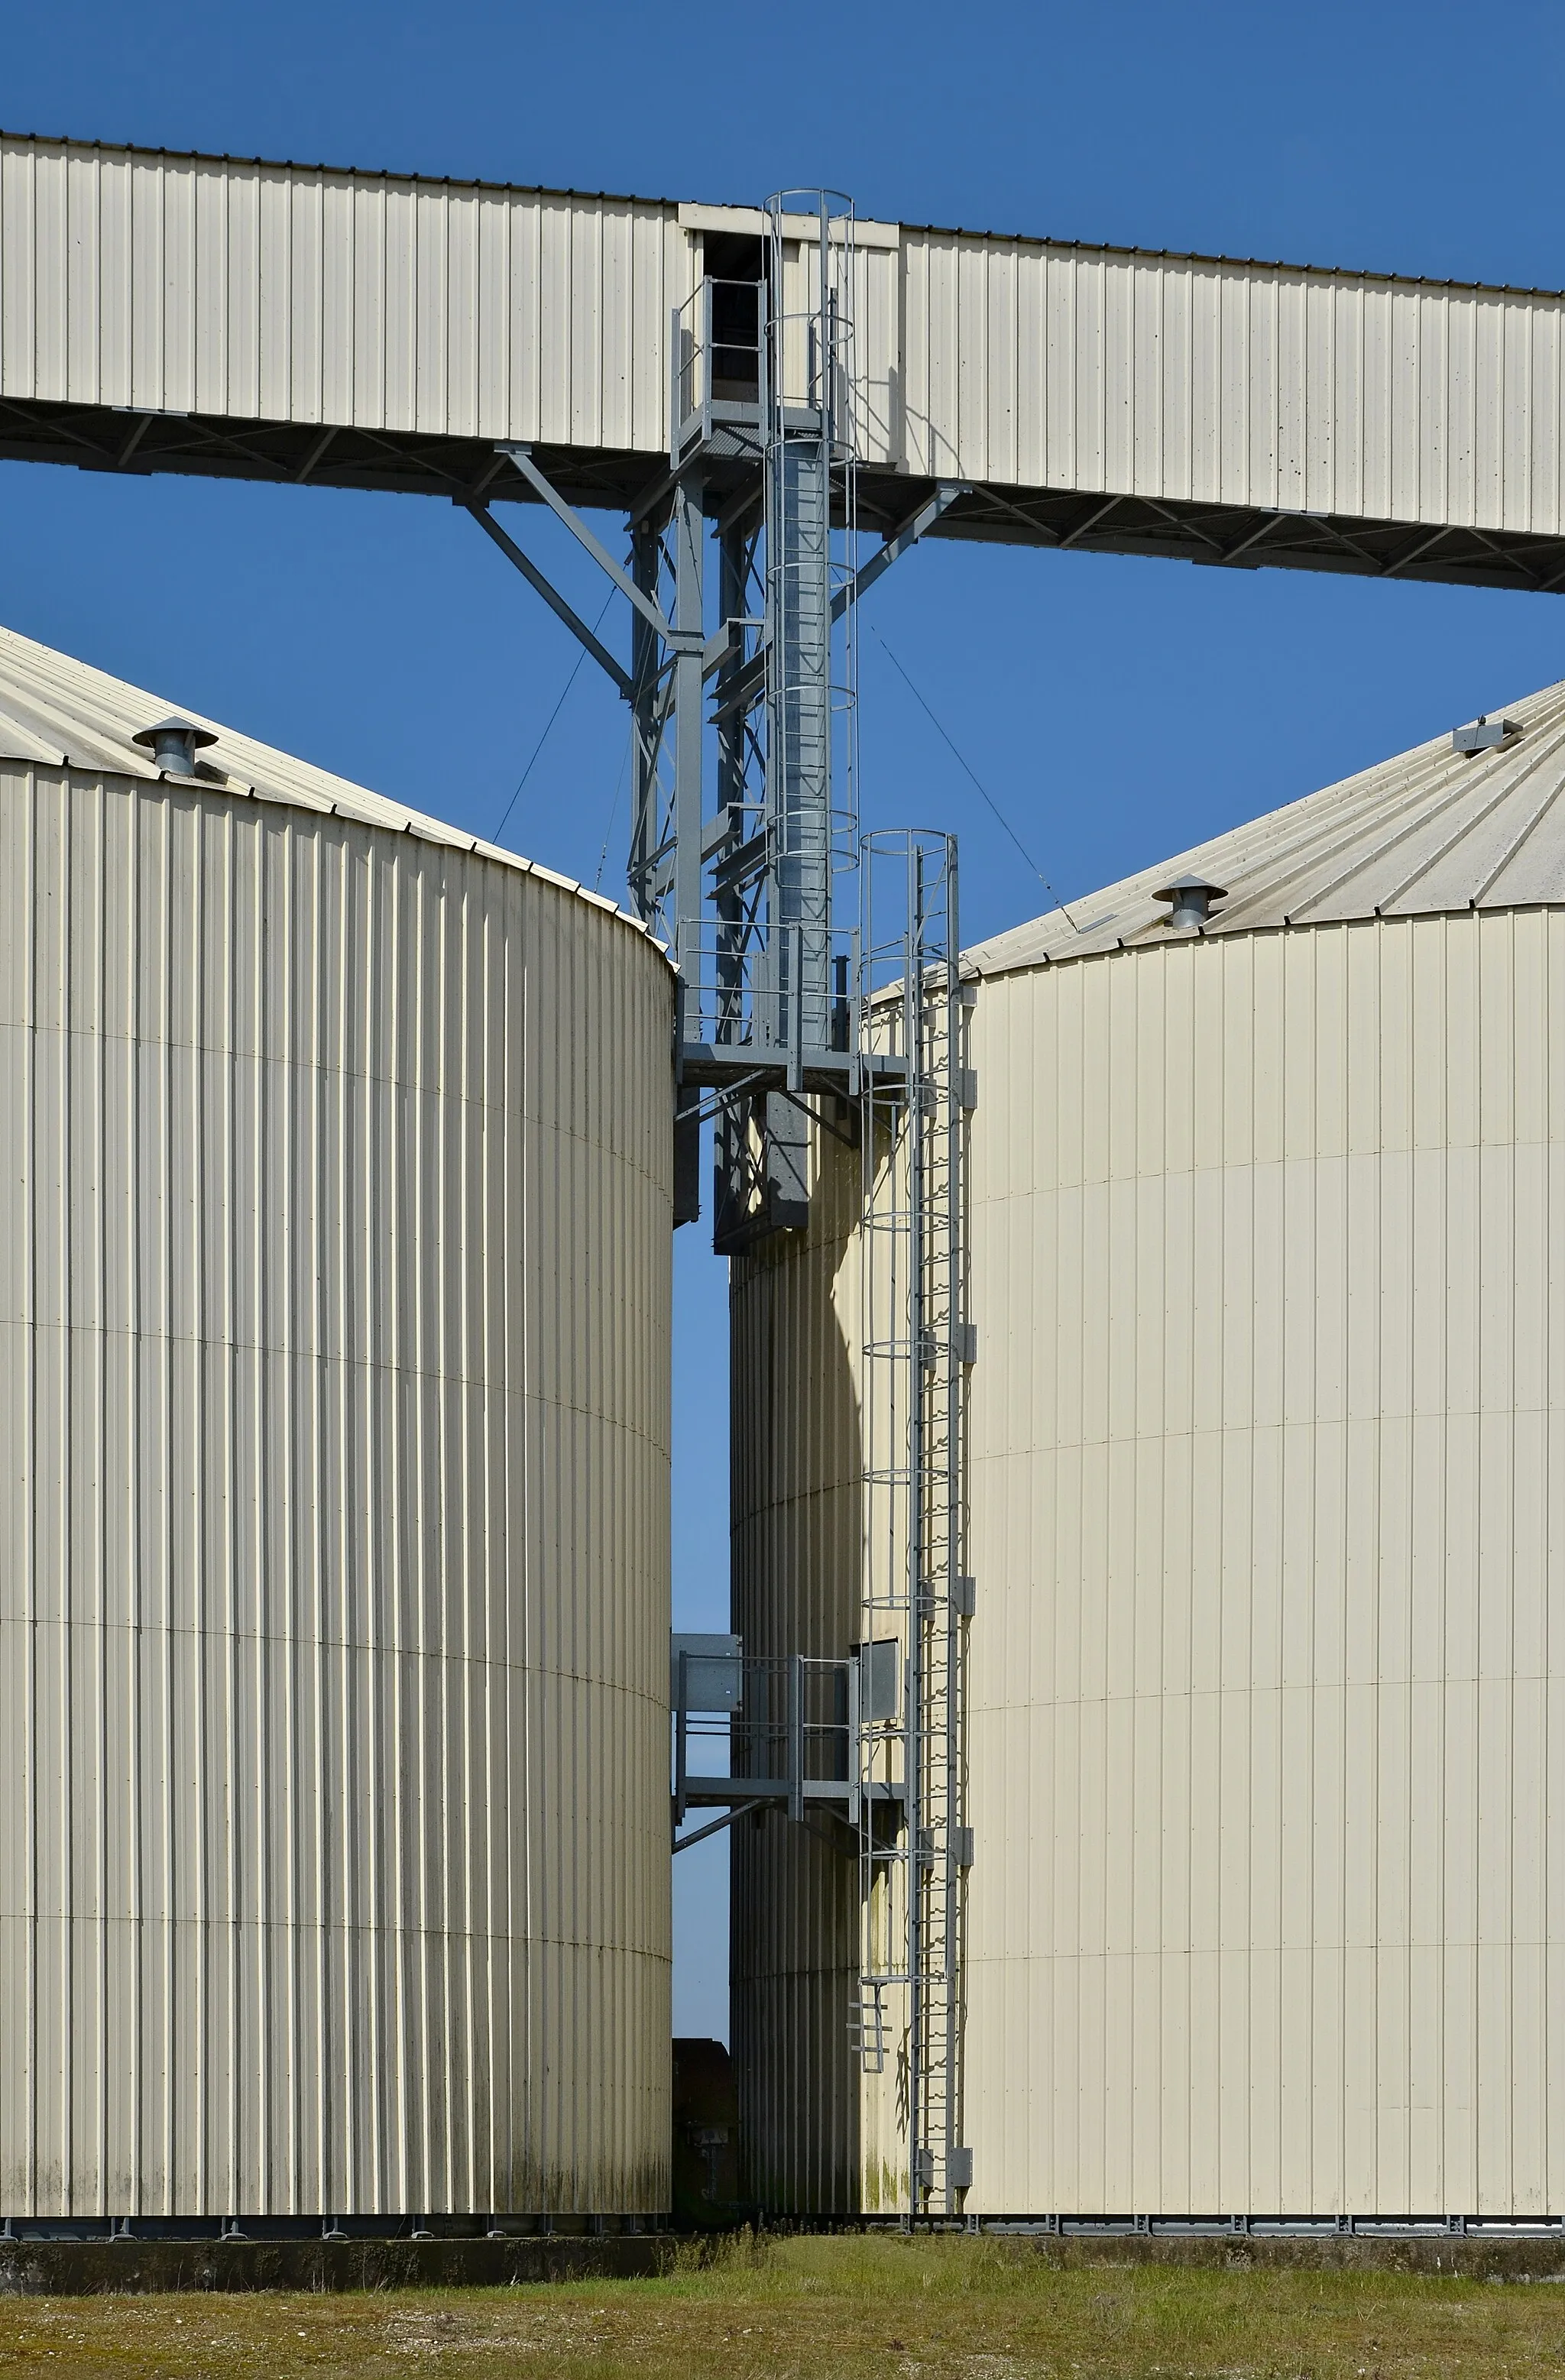 Photo showing: Ladders giving access to the silos, Le Bouchage, Charente, France